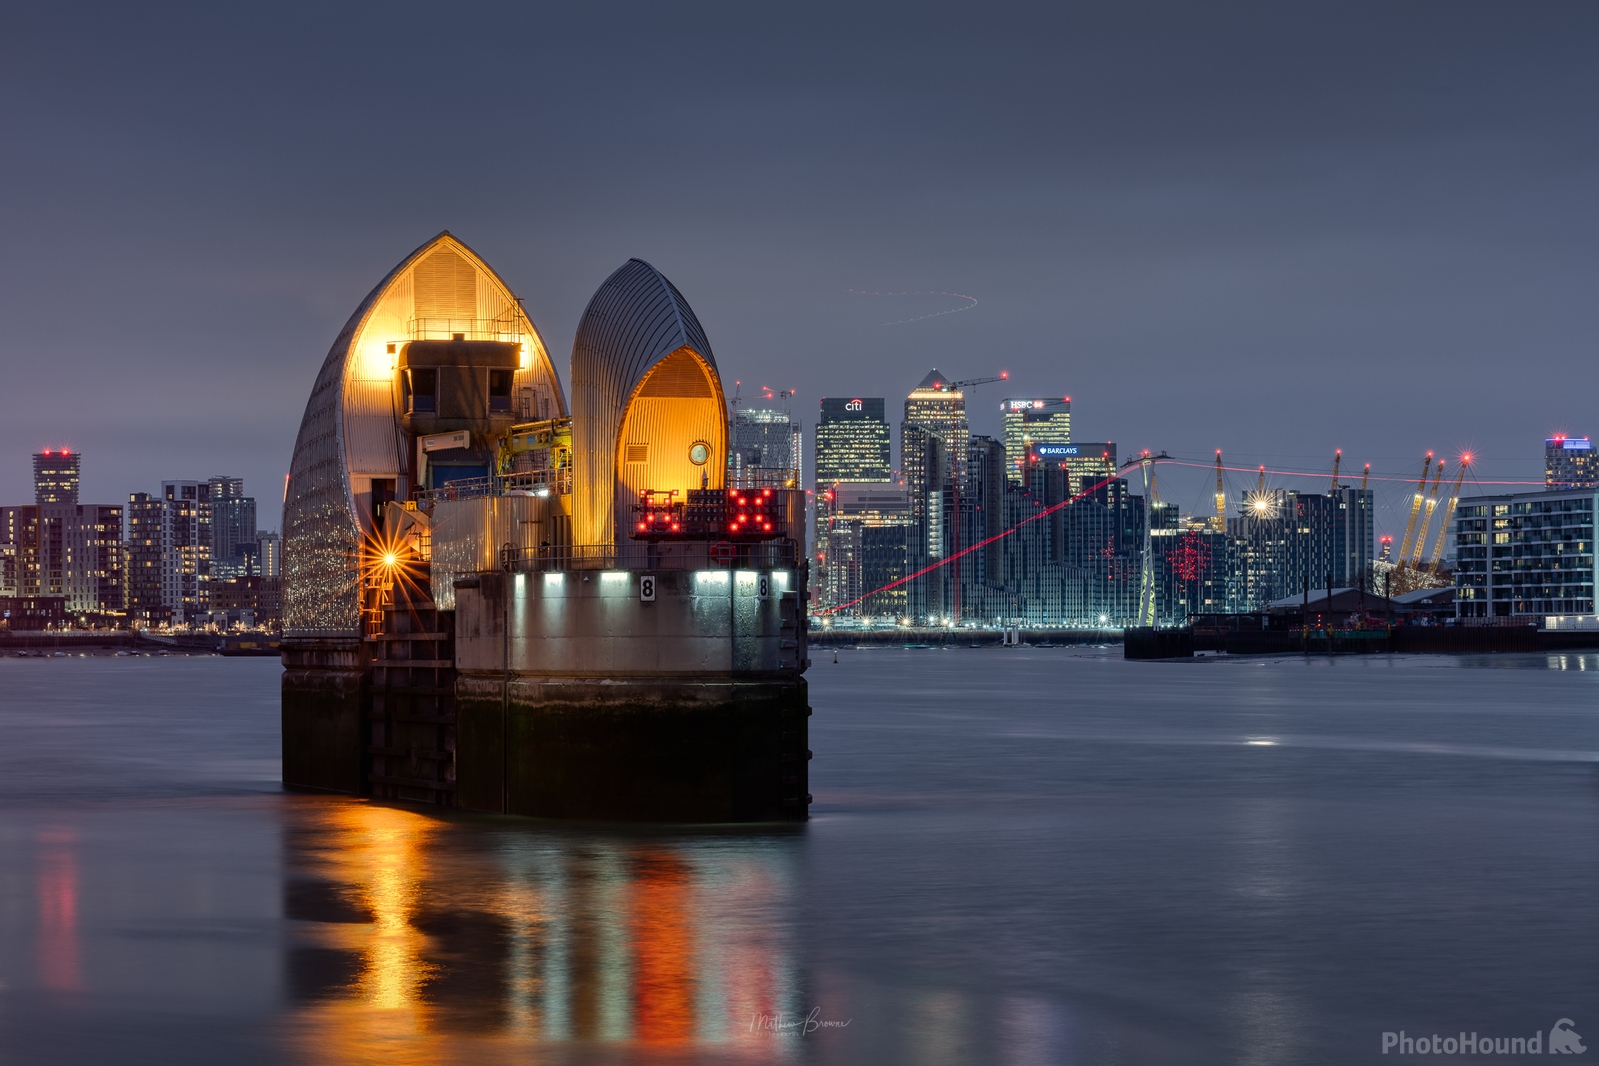 Image of Thames Barrier by Mathew Browne